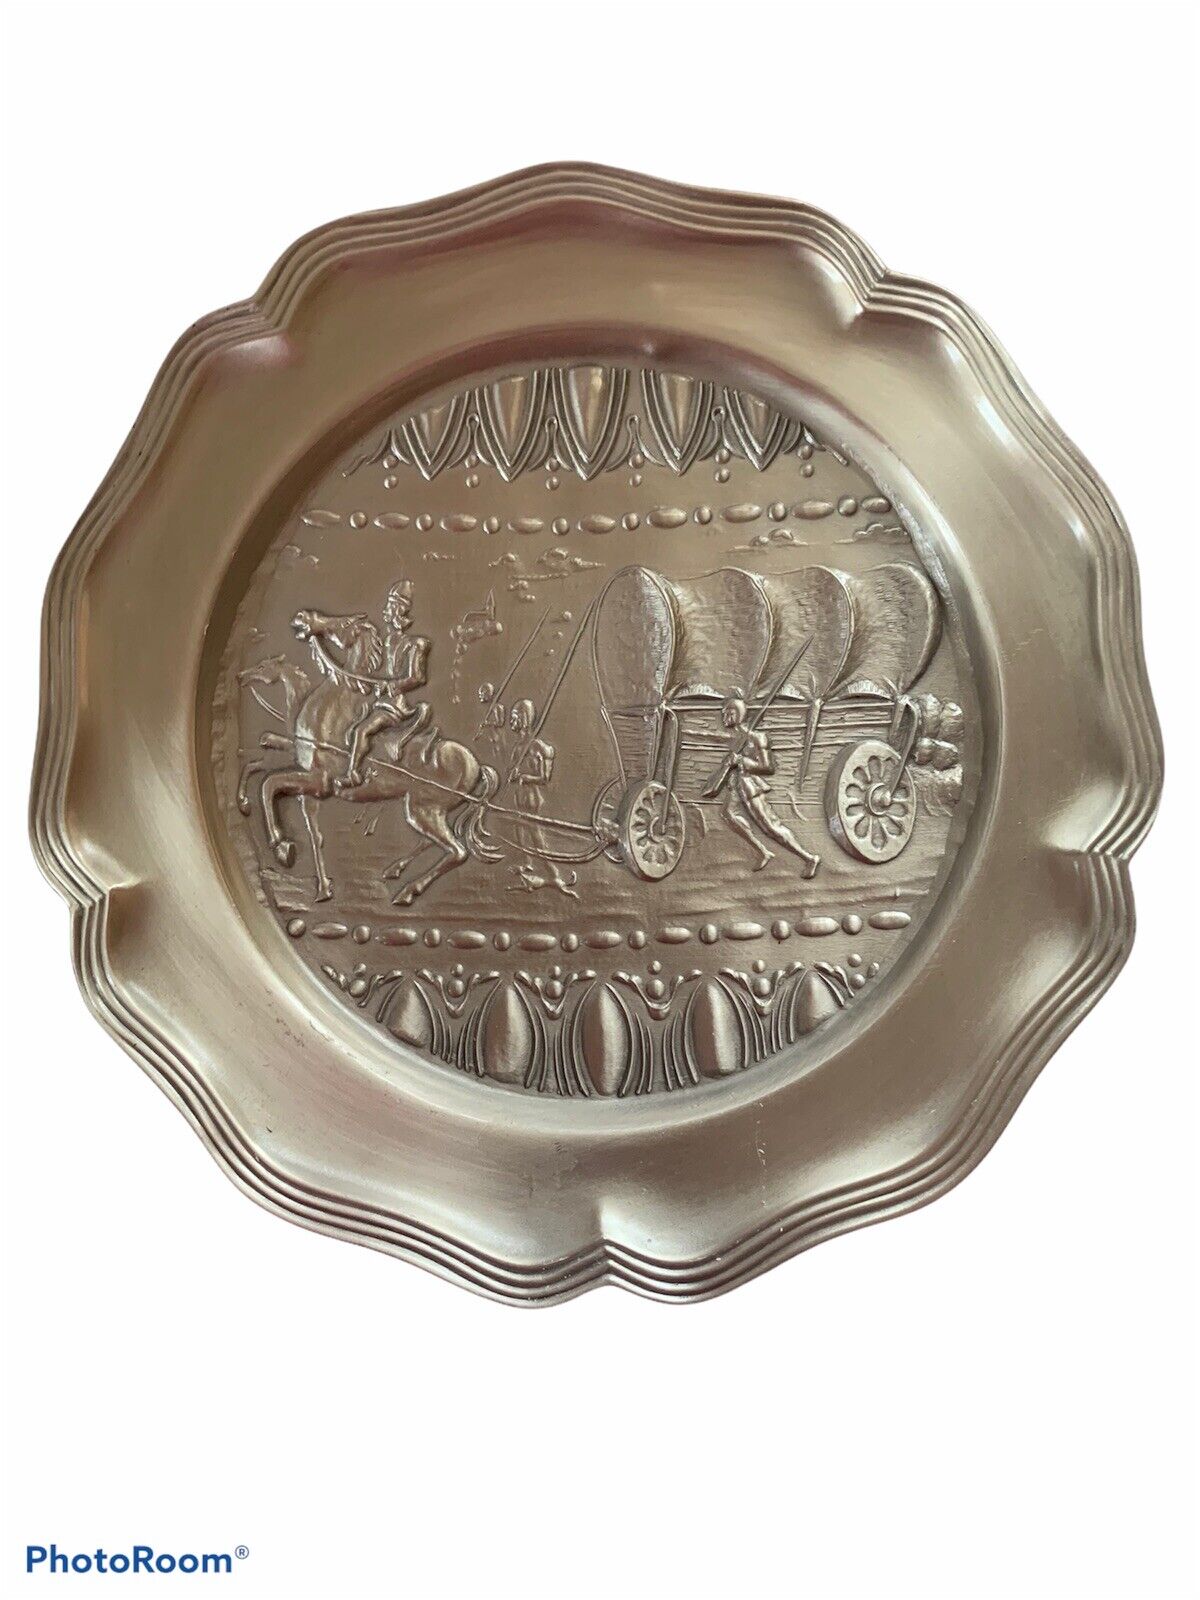 Vintage Plate Pewter Hammered Scene Knights On Horse Pulling Large Cart